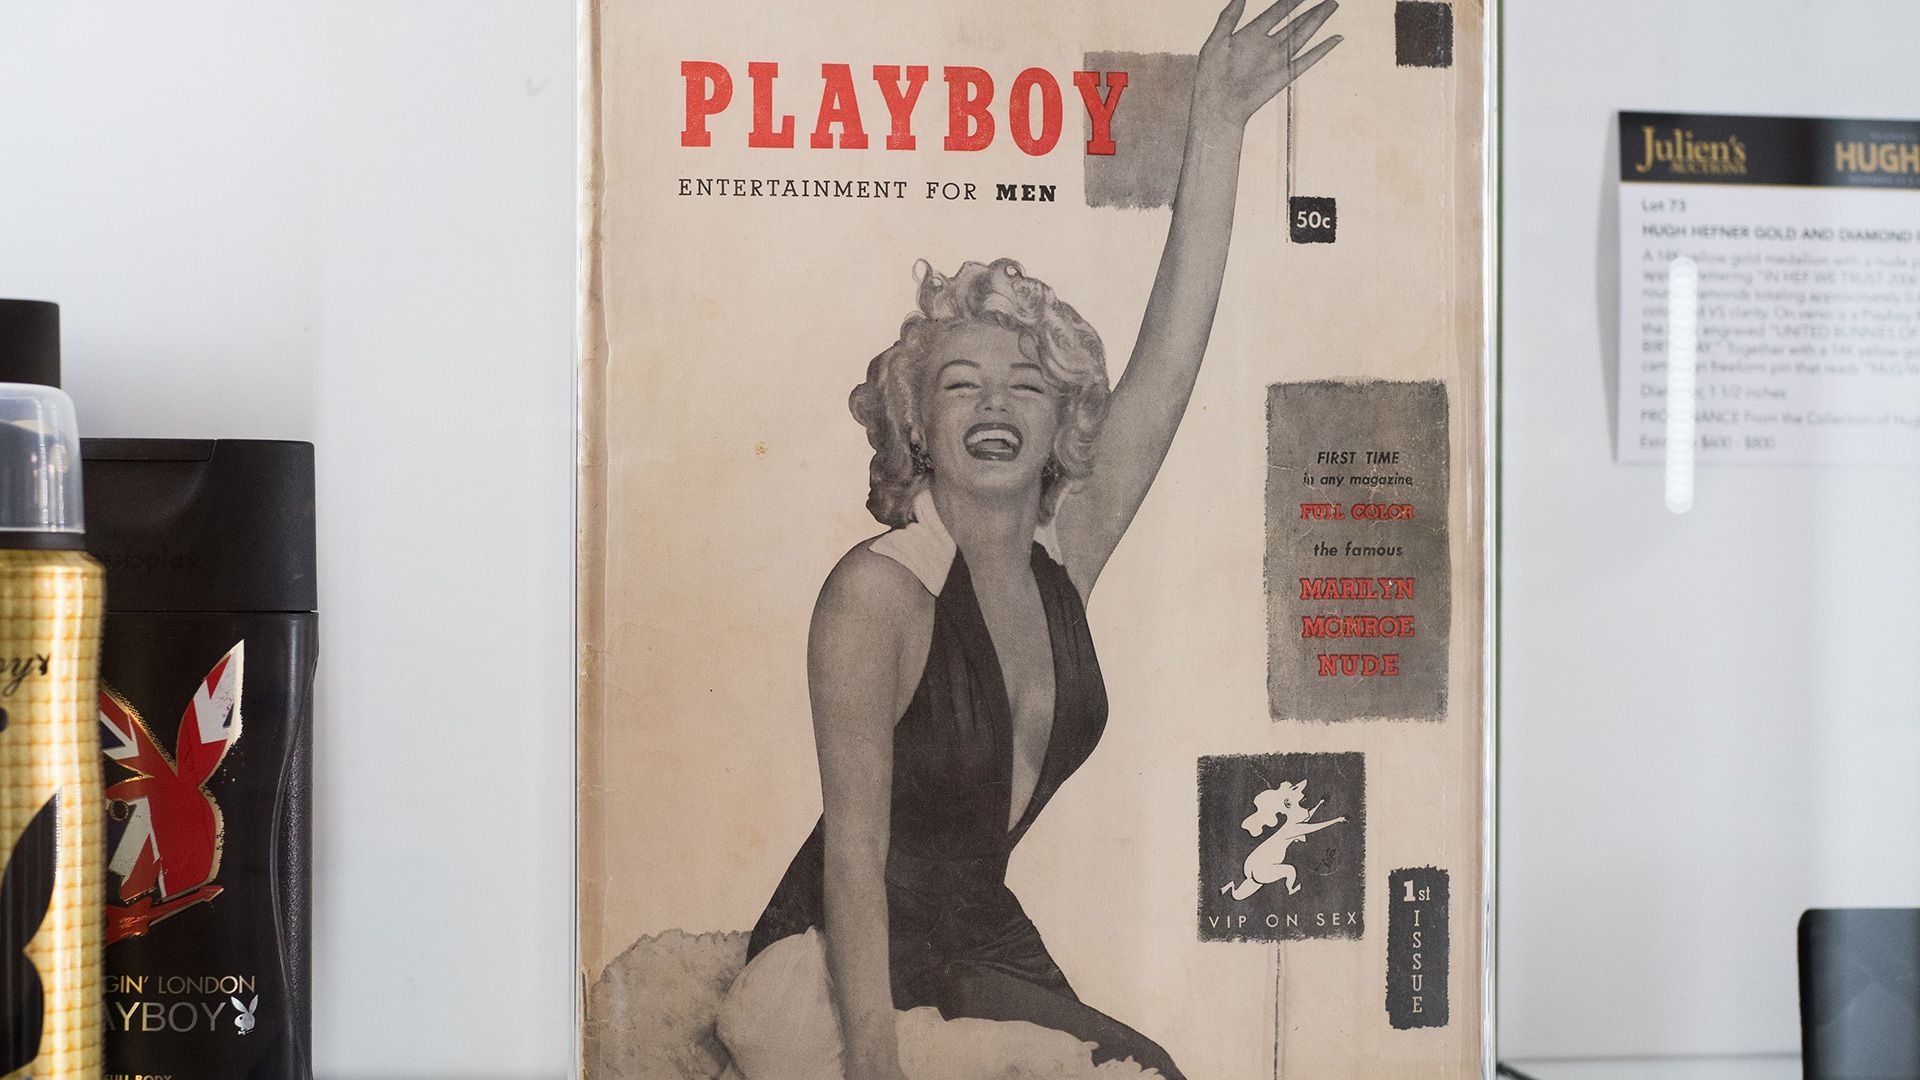 Marilyn Monroe Didnt Actually Pose for the First Issue of Playboy